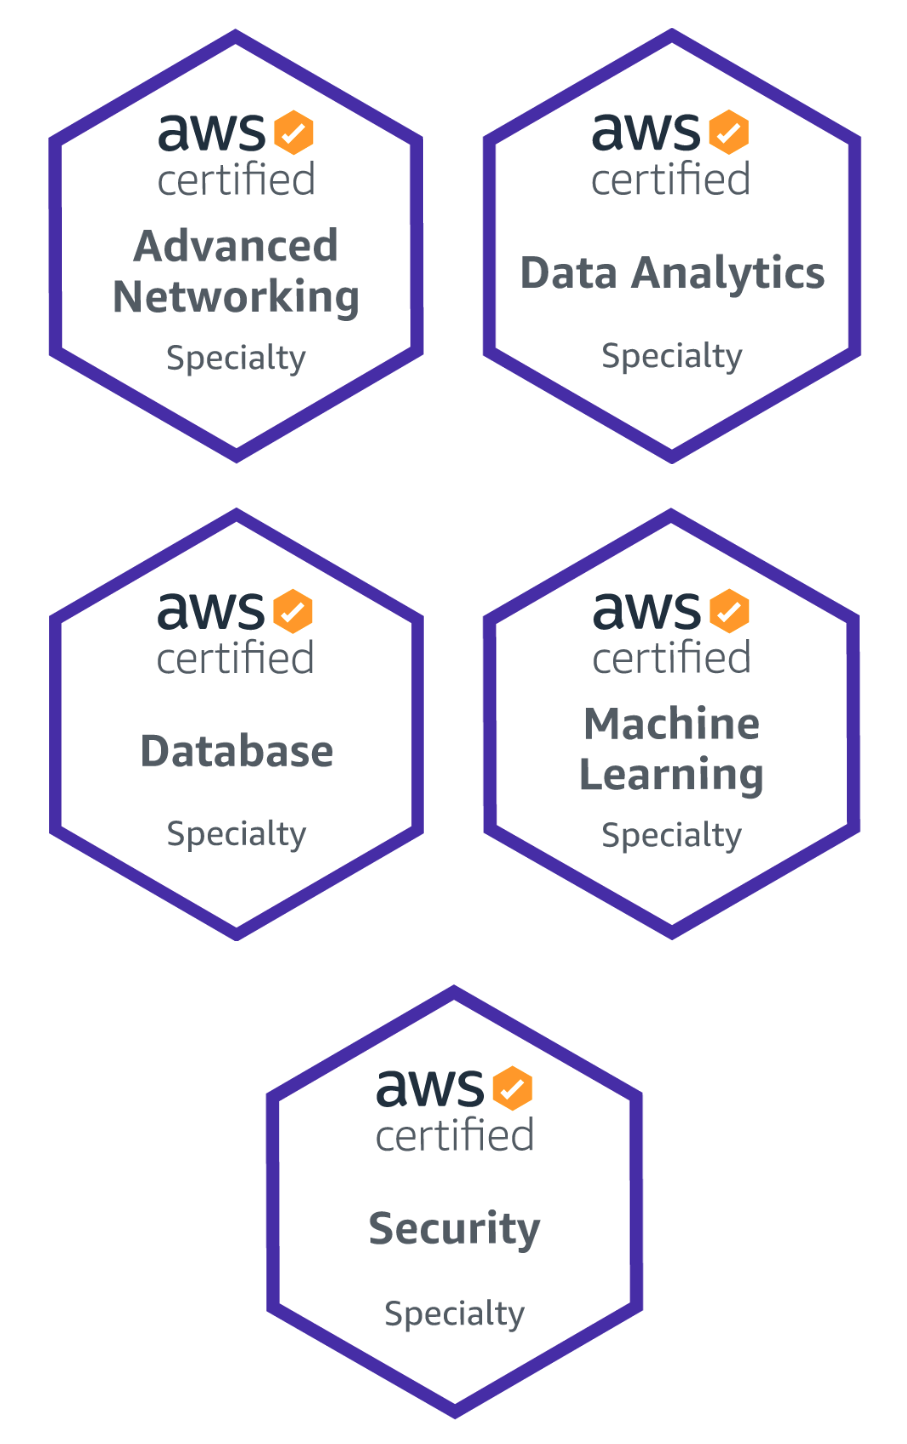 AWS speciality certifications: Advanced Networking, Data Analytics, Database, Machine Learning, Security